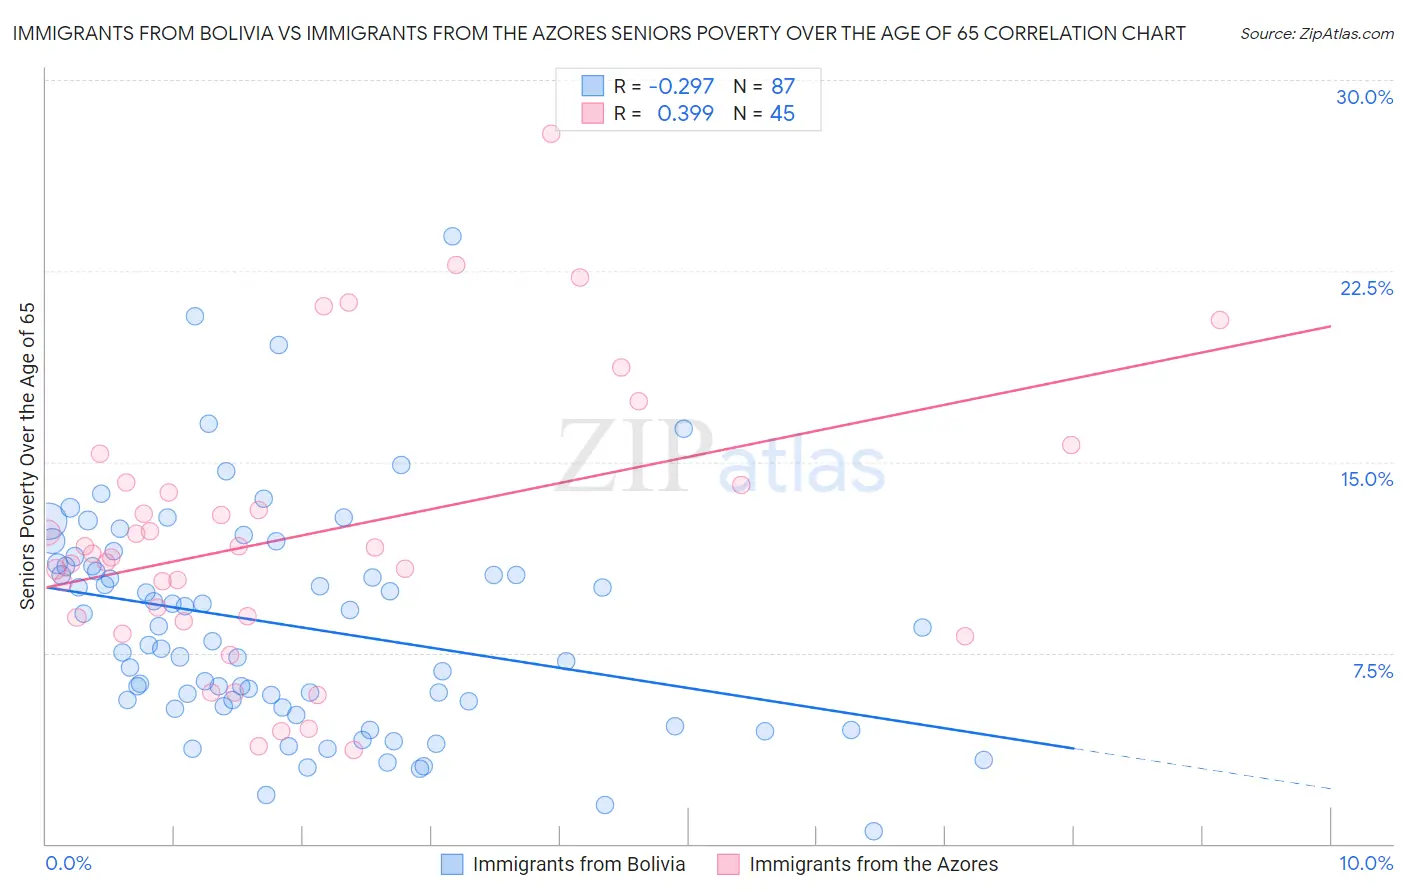 Immigrants from Bolivia vs Immigrants from the Azores Seniors Poverty Over the Age of 65